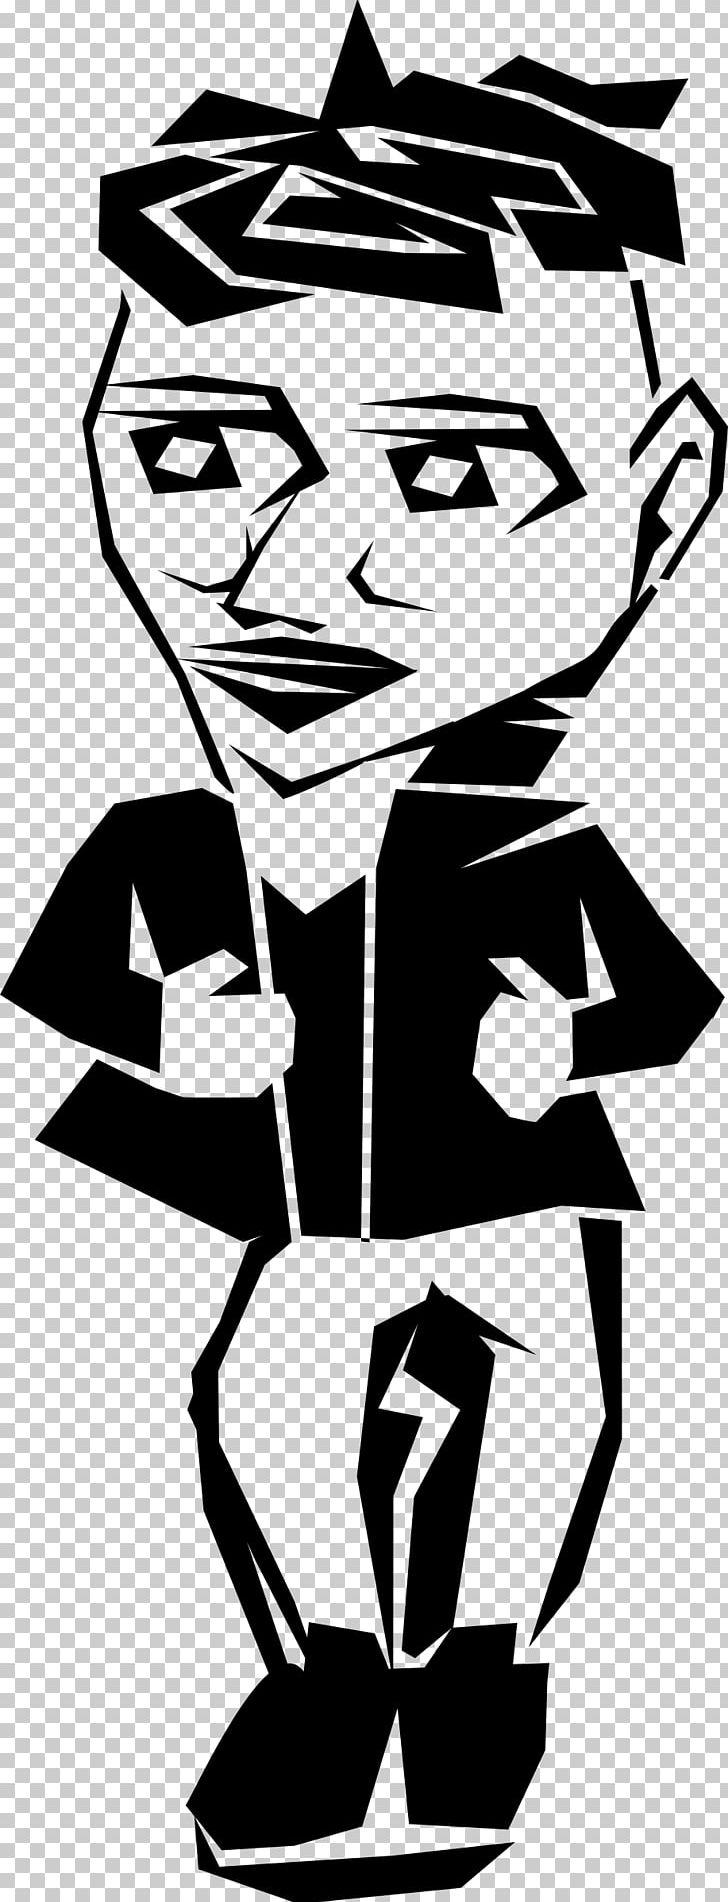 Visual Arts Drawing PNG, Clipart, Art, Artwork, Black, Black And White, Boys Free PNG Download